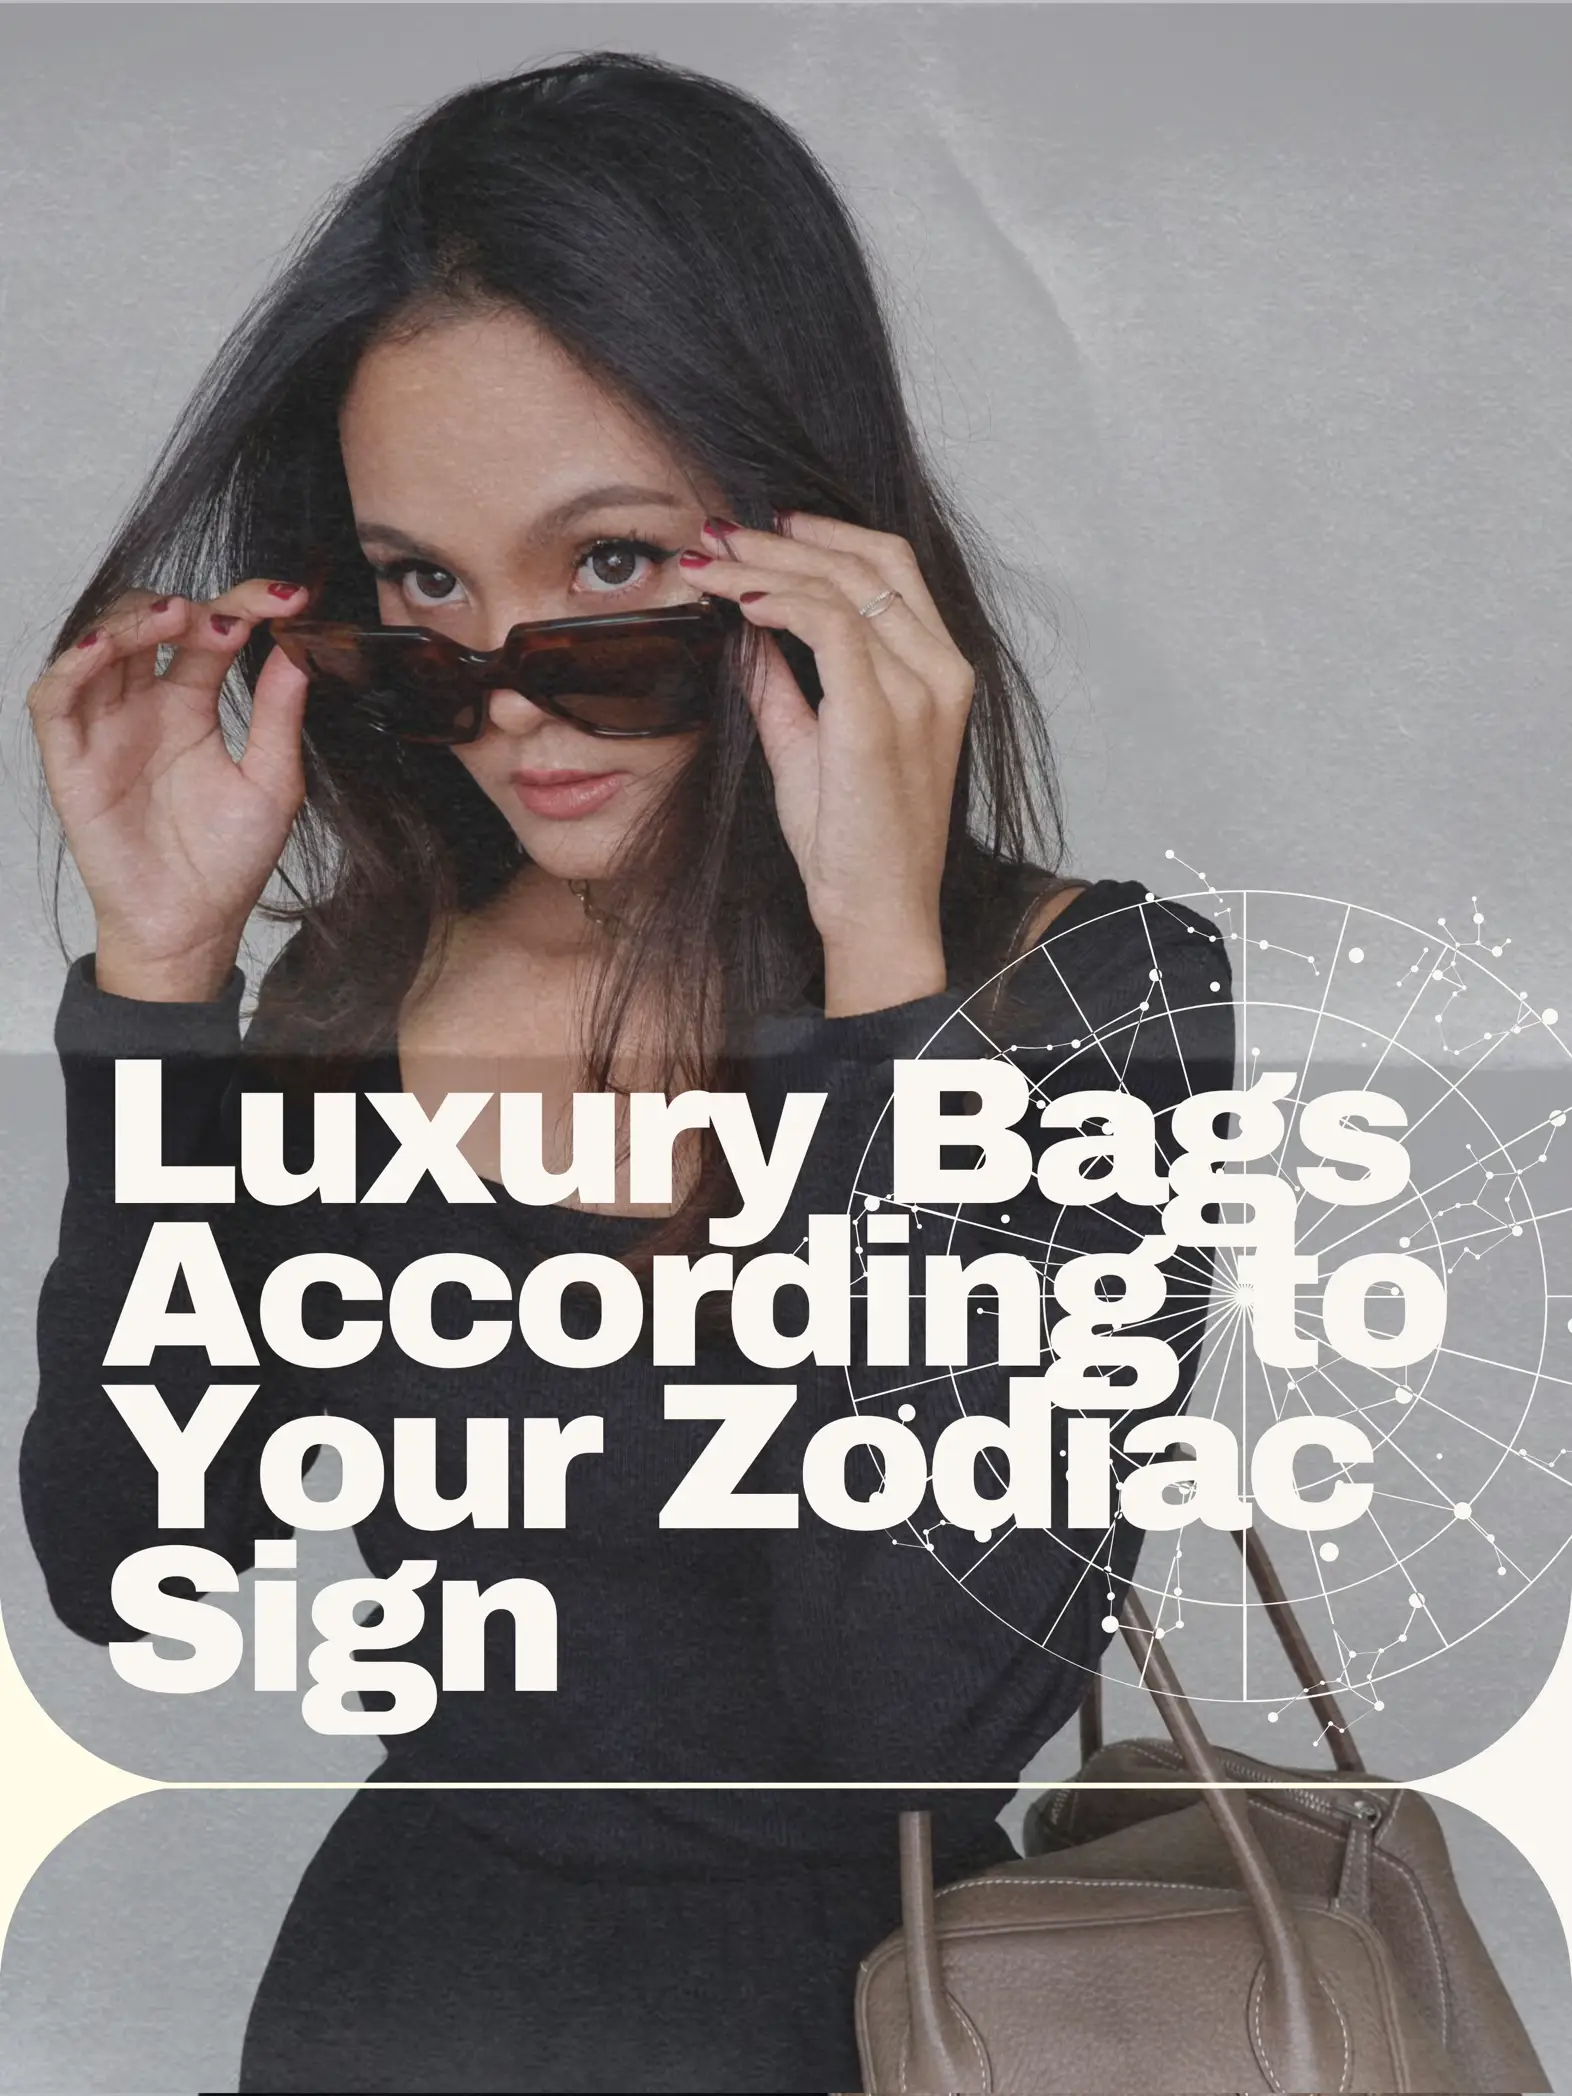 The Luxury Bag You Should Own Based on Your Zodiac Sign